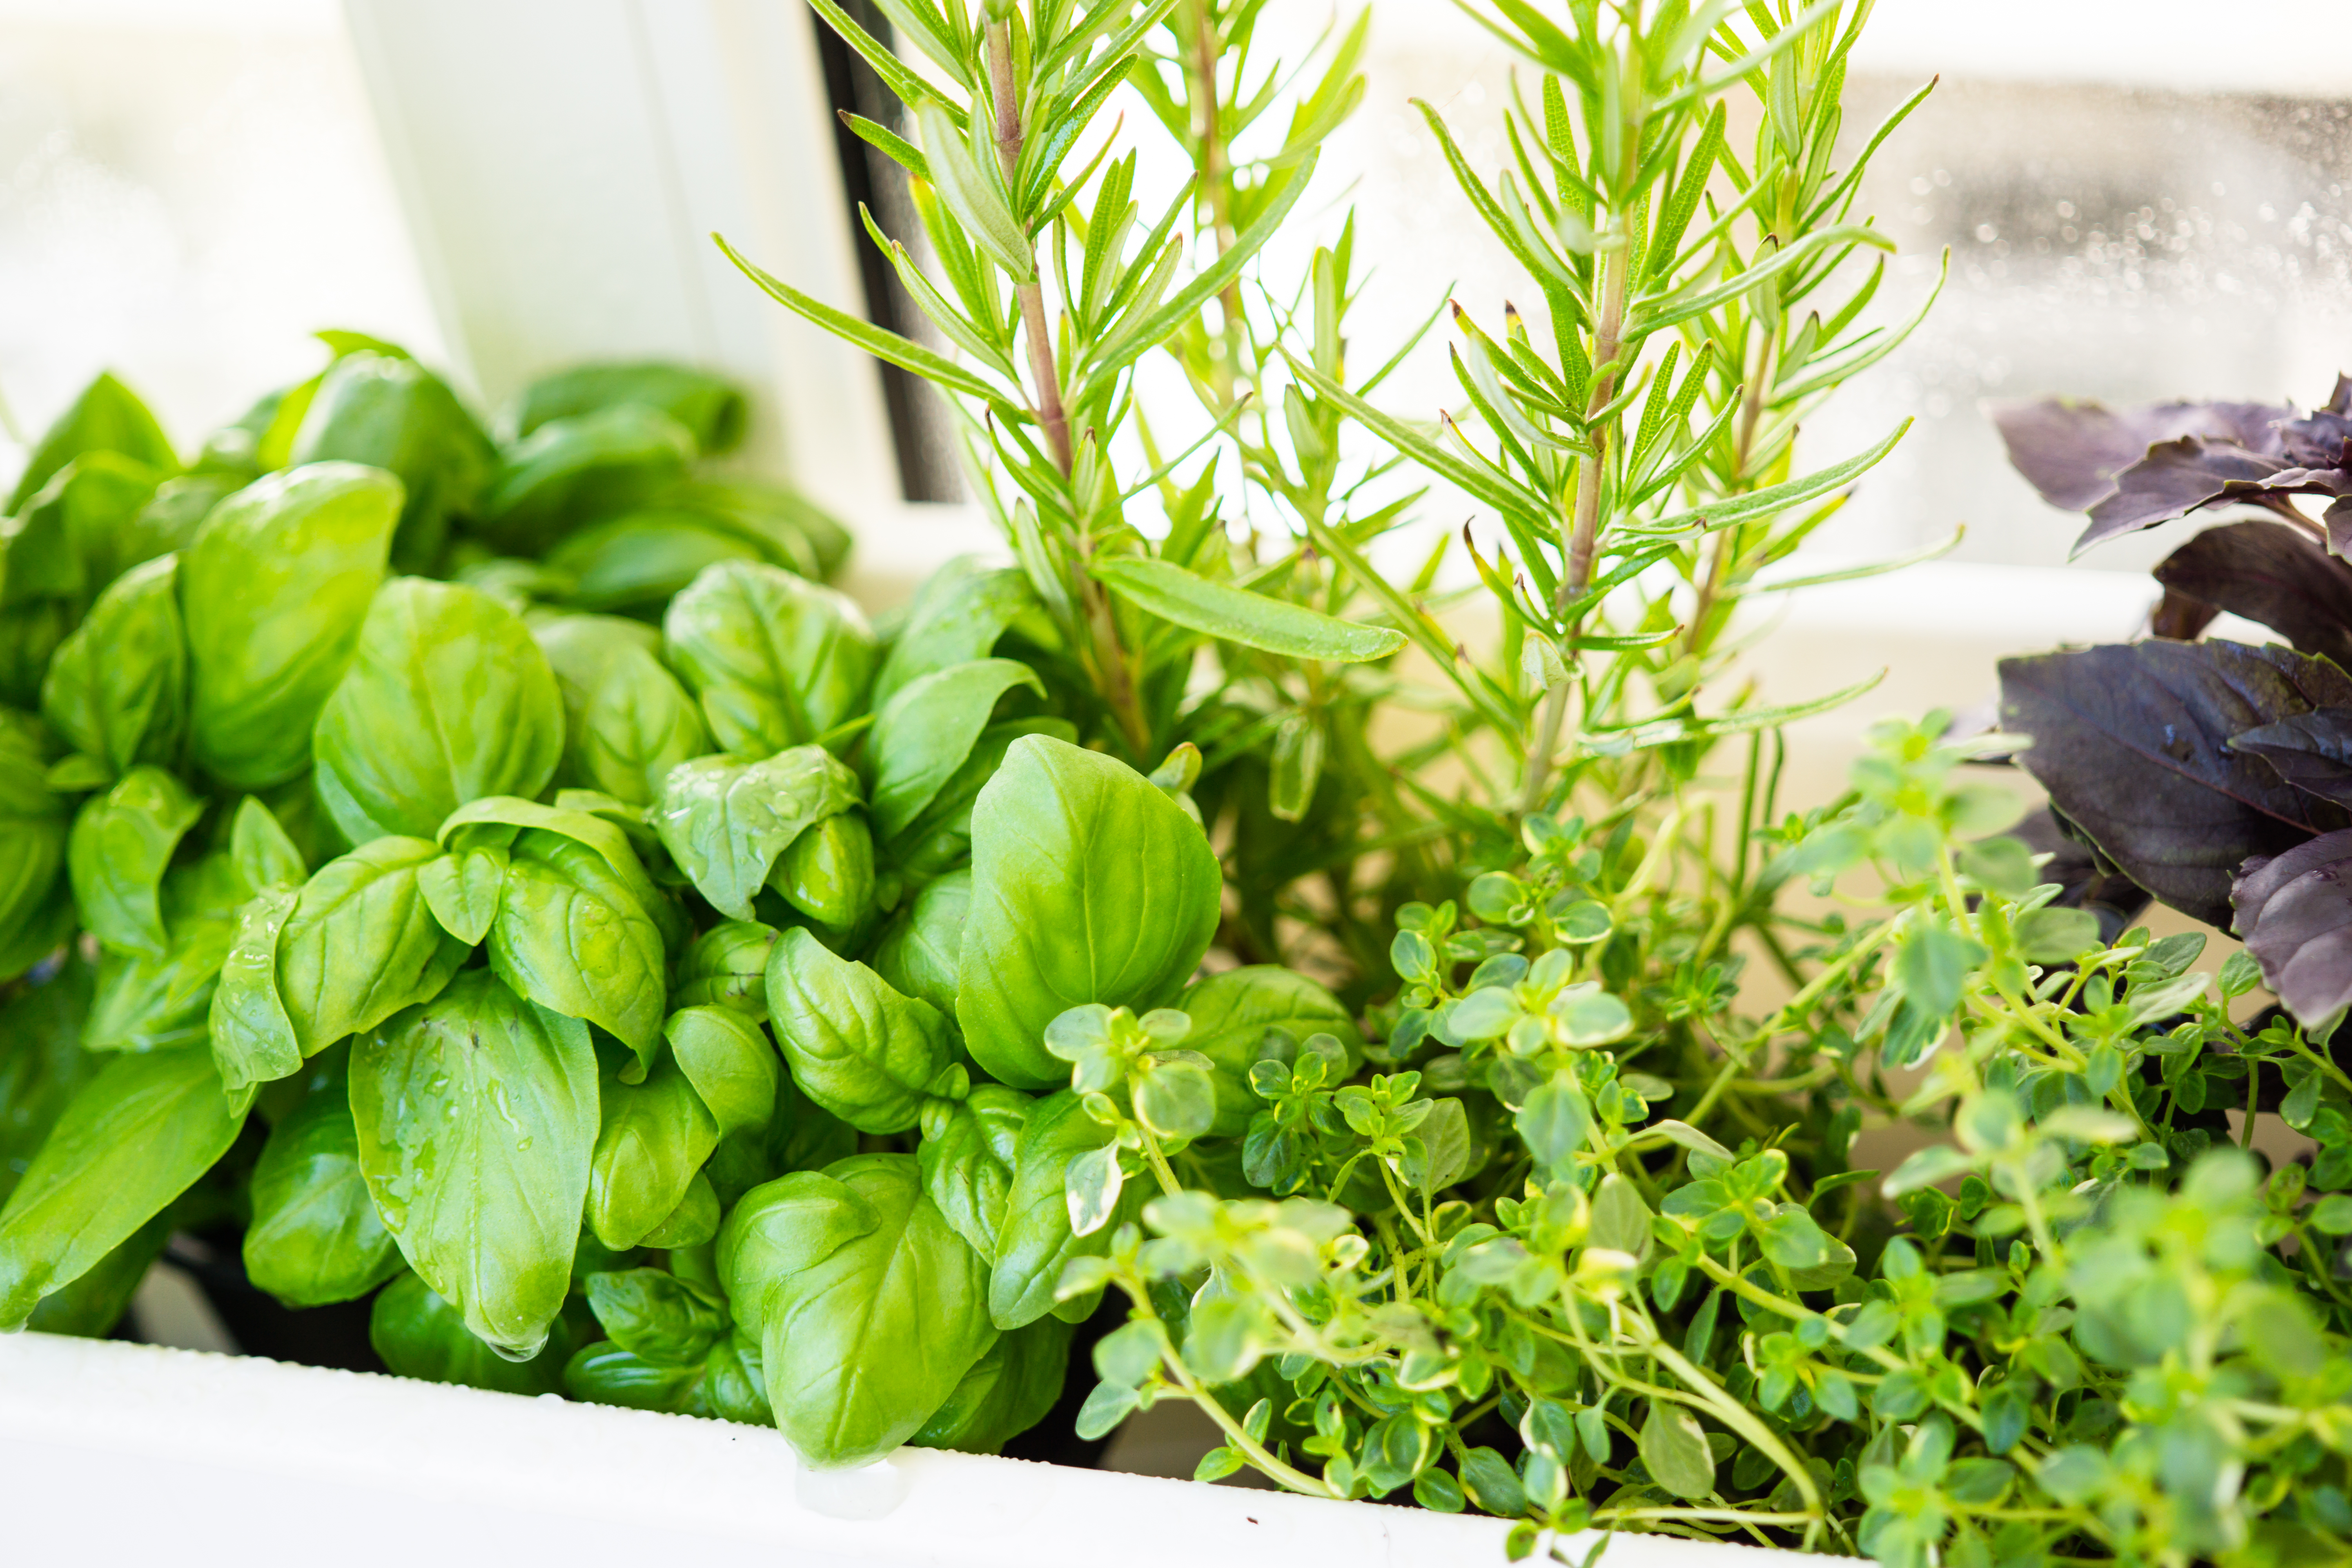 Basil, rosemary, and thyme plants beside a window indoors